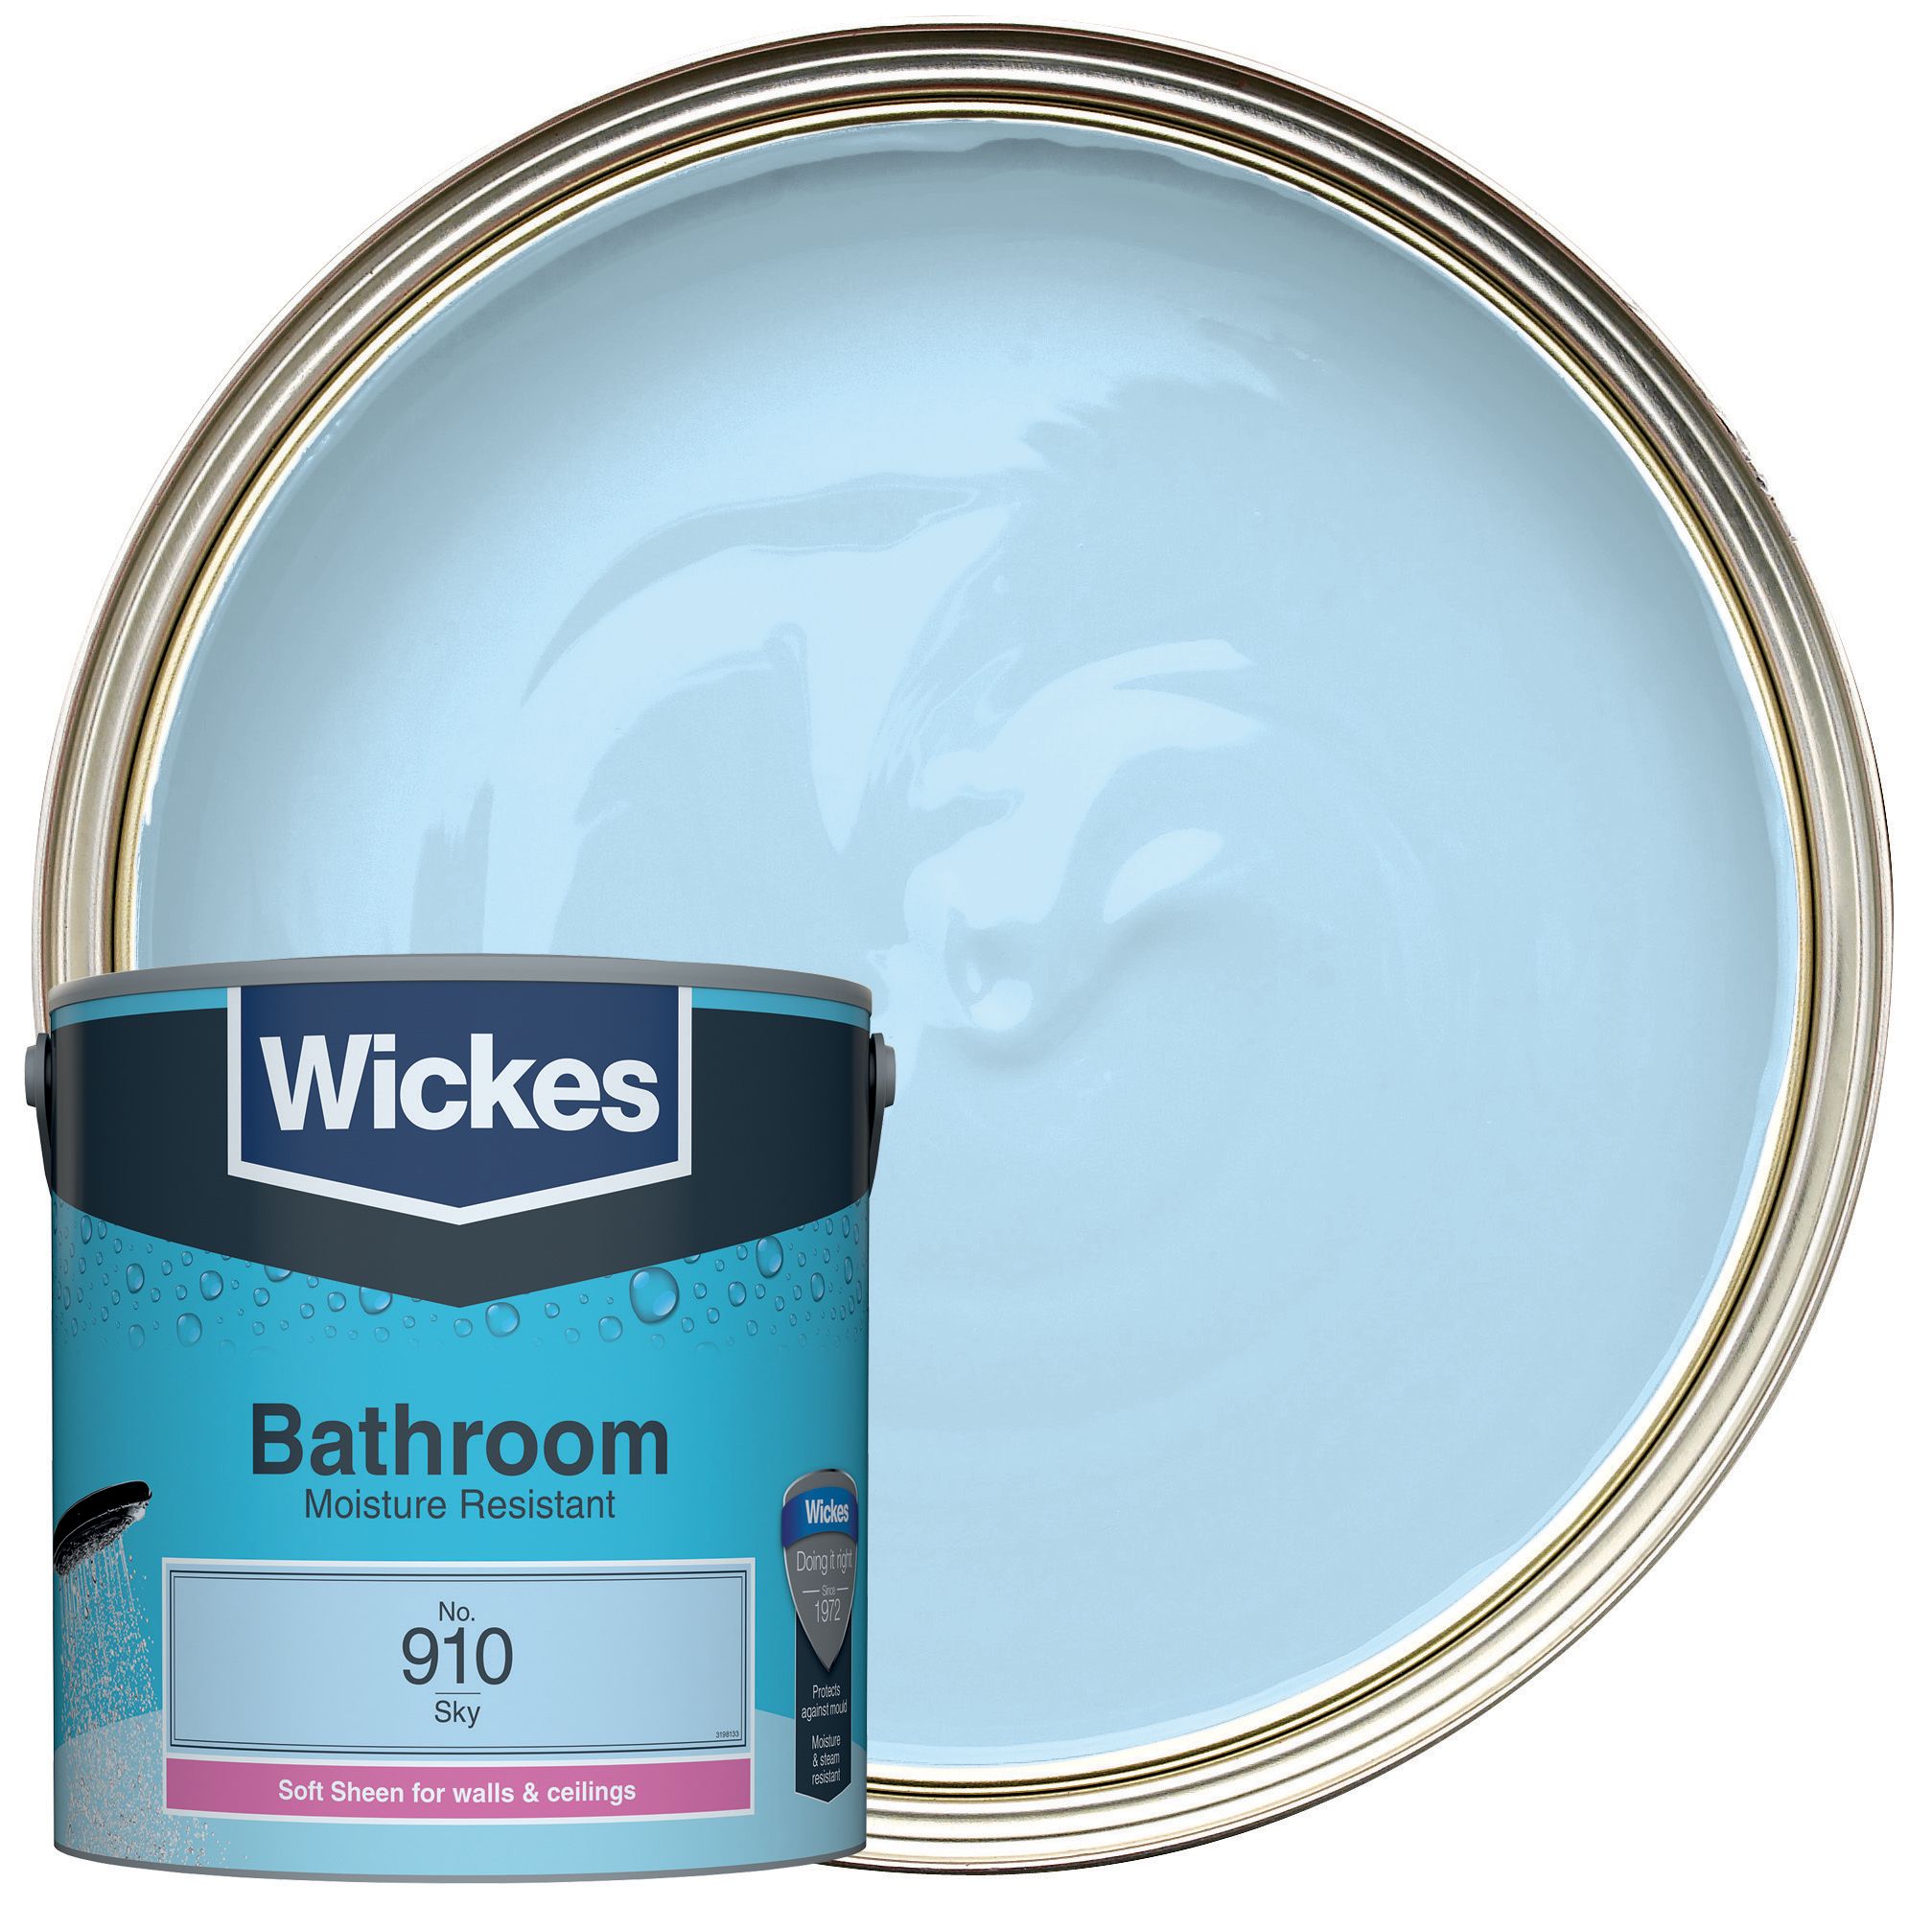 Image of Wickes Bathroom Soft Sheen Emulsion Paint - Sky No.910 - 2.5L